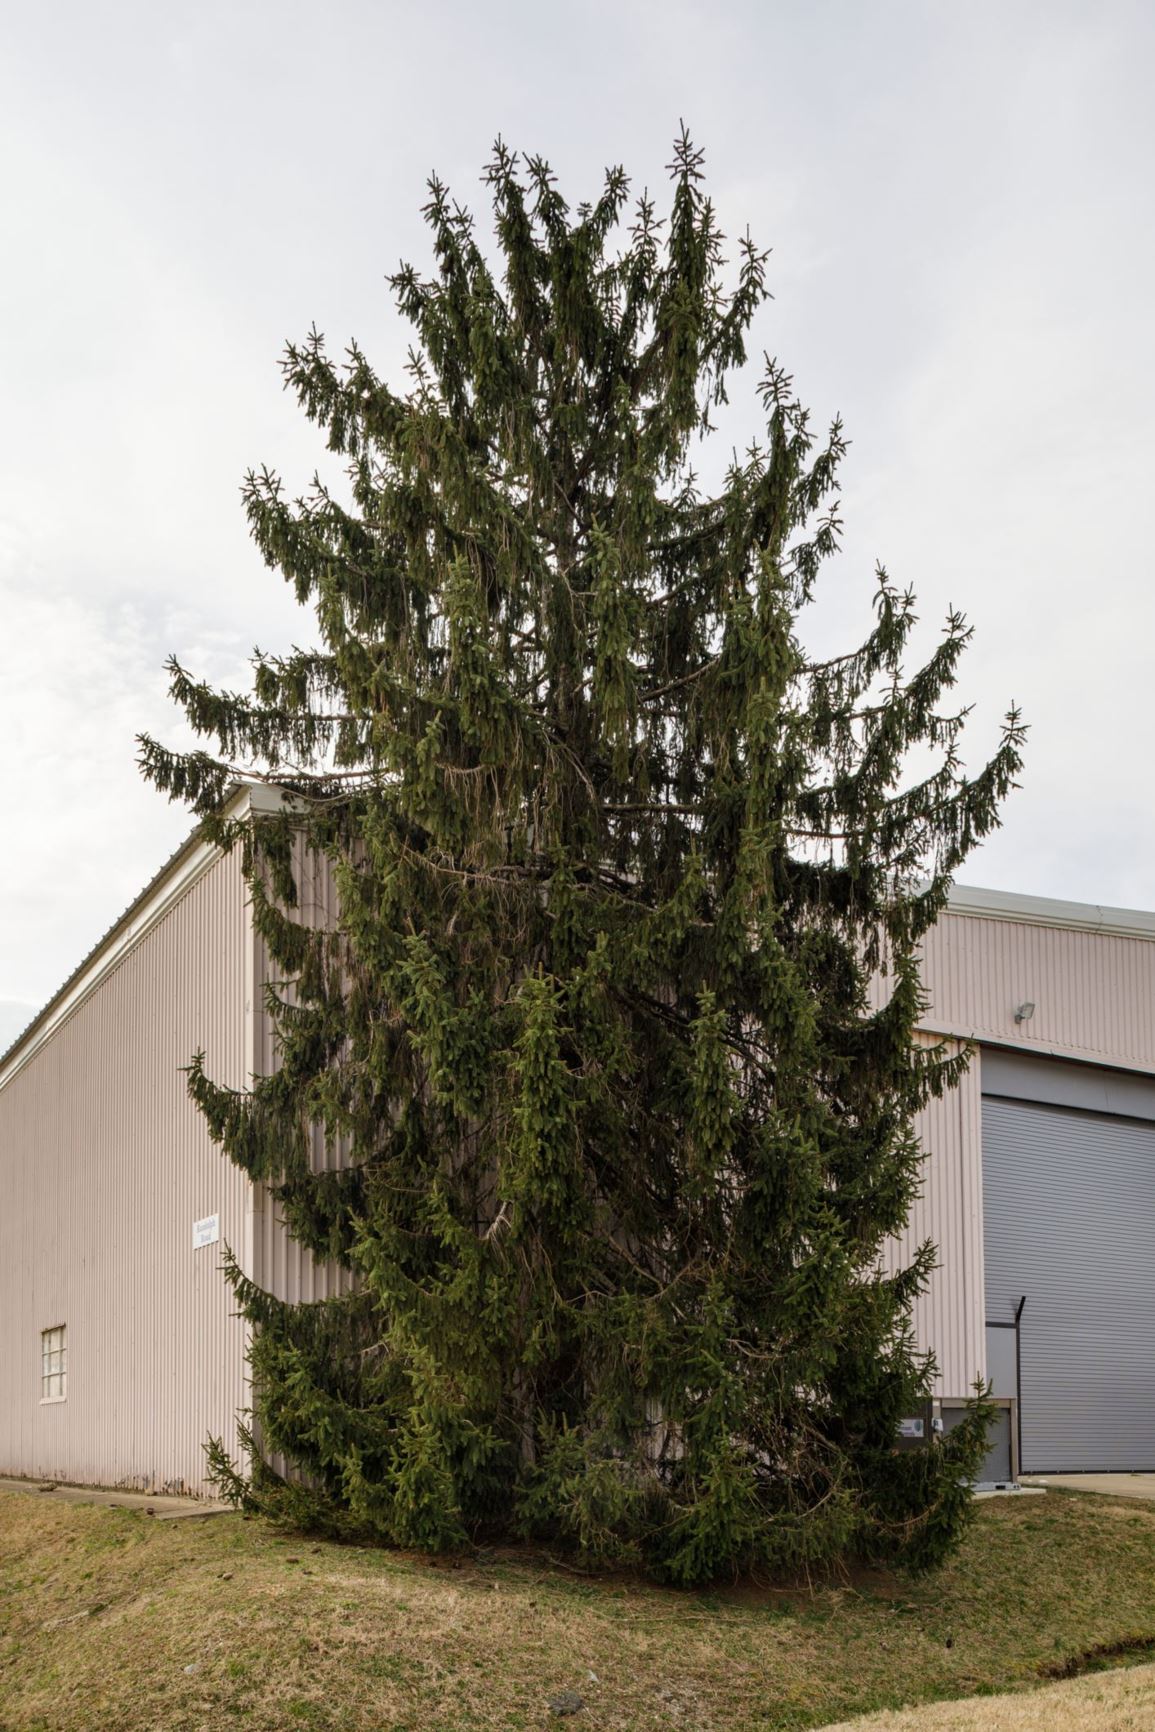 Picea abies - European Spruce, Norway Spruce, White Spruce